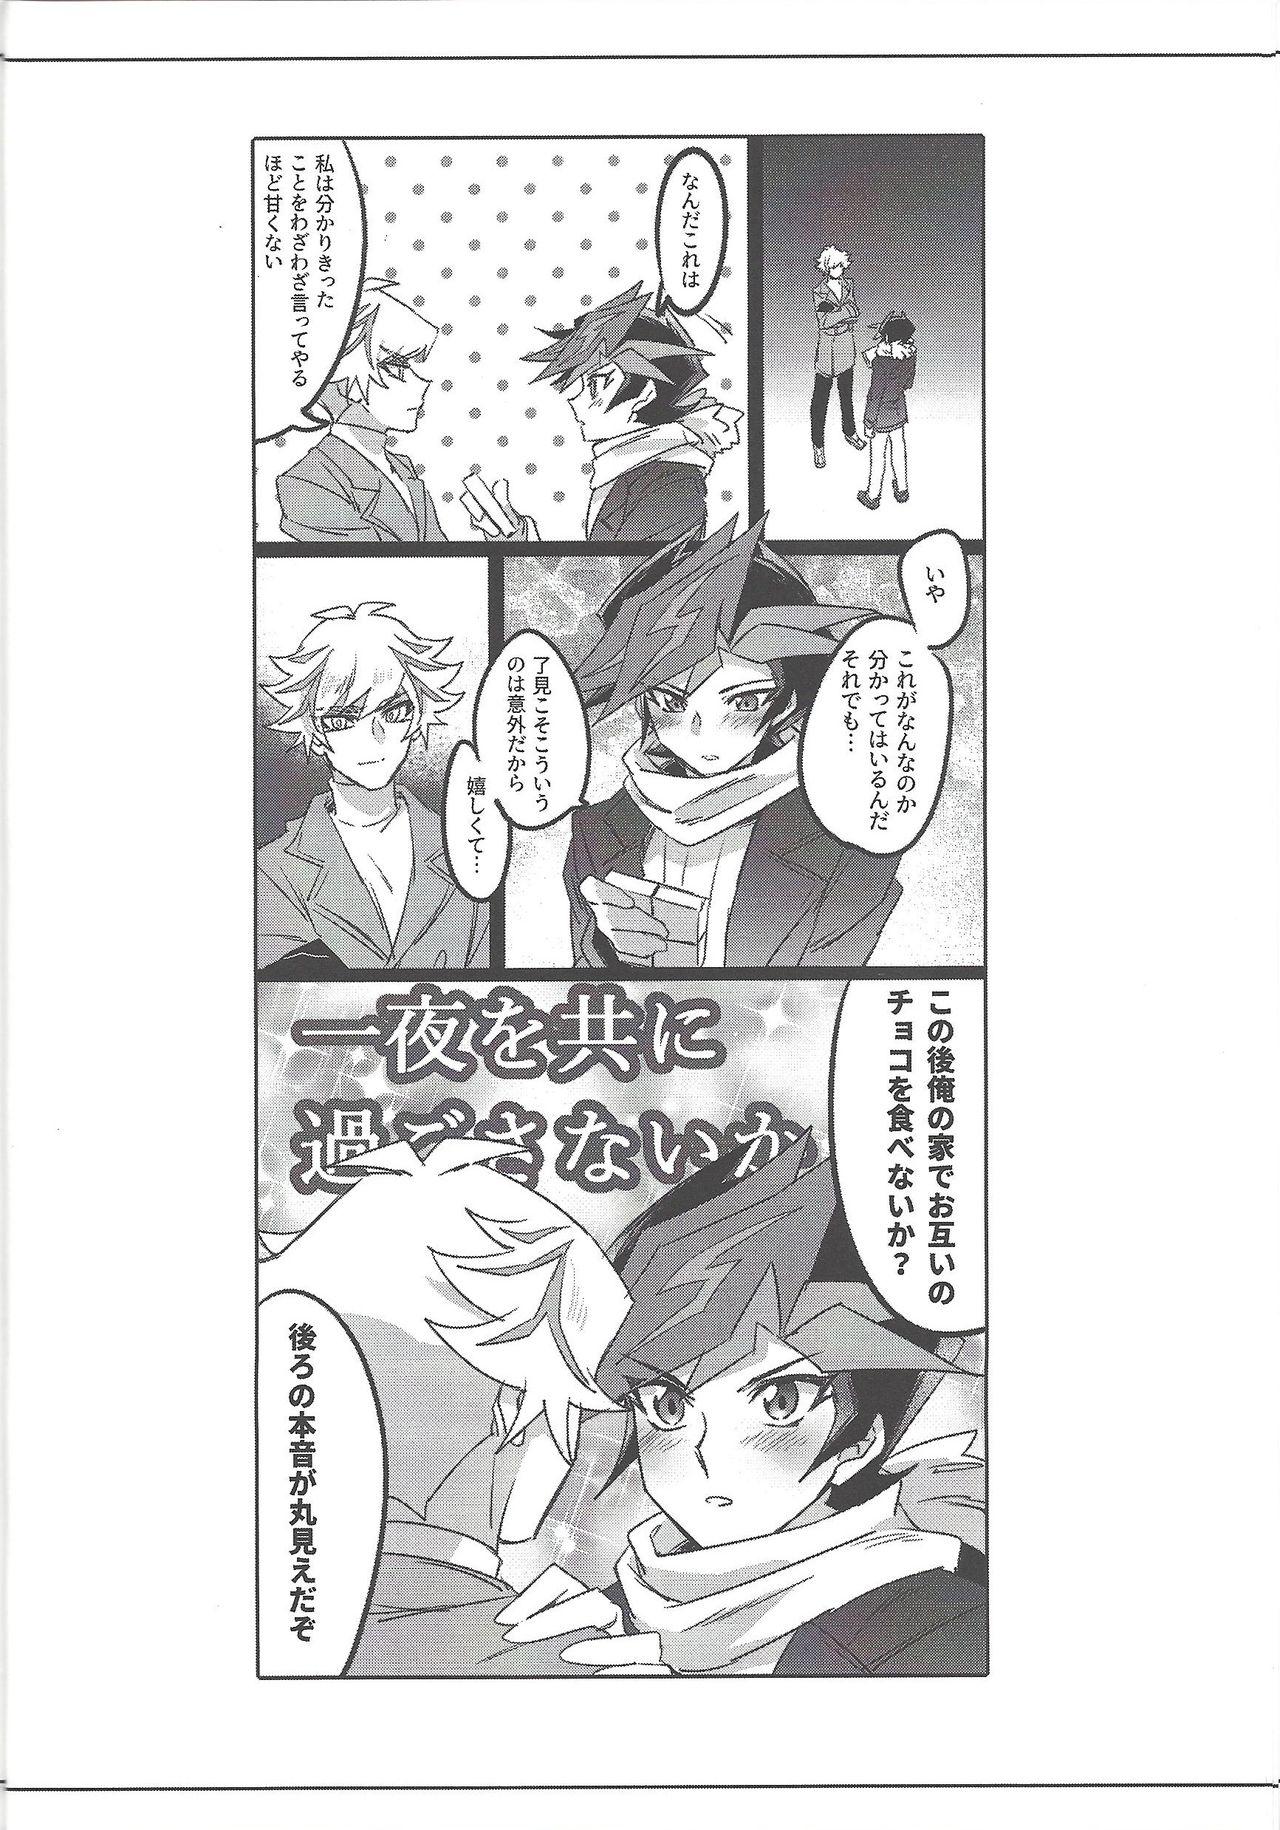 Swingers Keep a Record - Yu-gi-oh vrains Foursome - Page 13